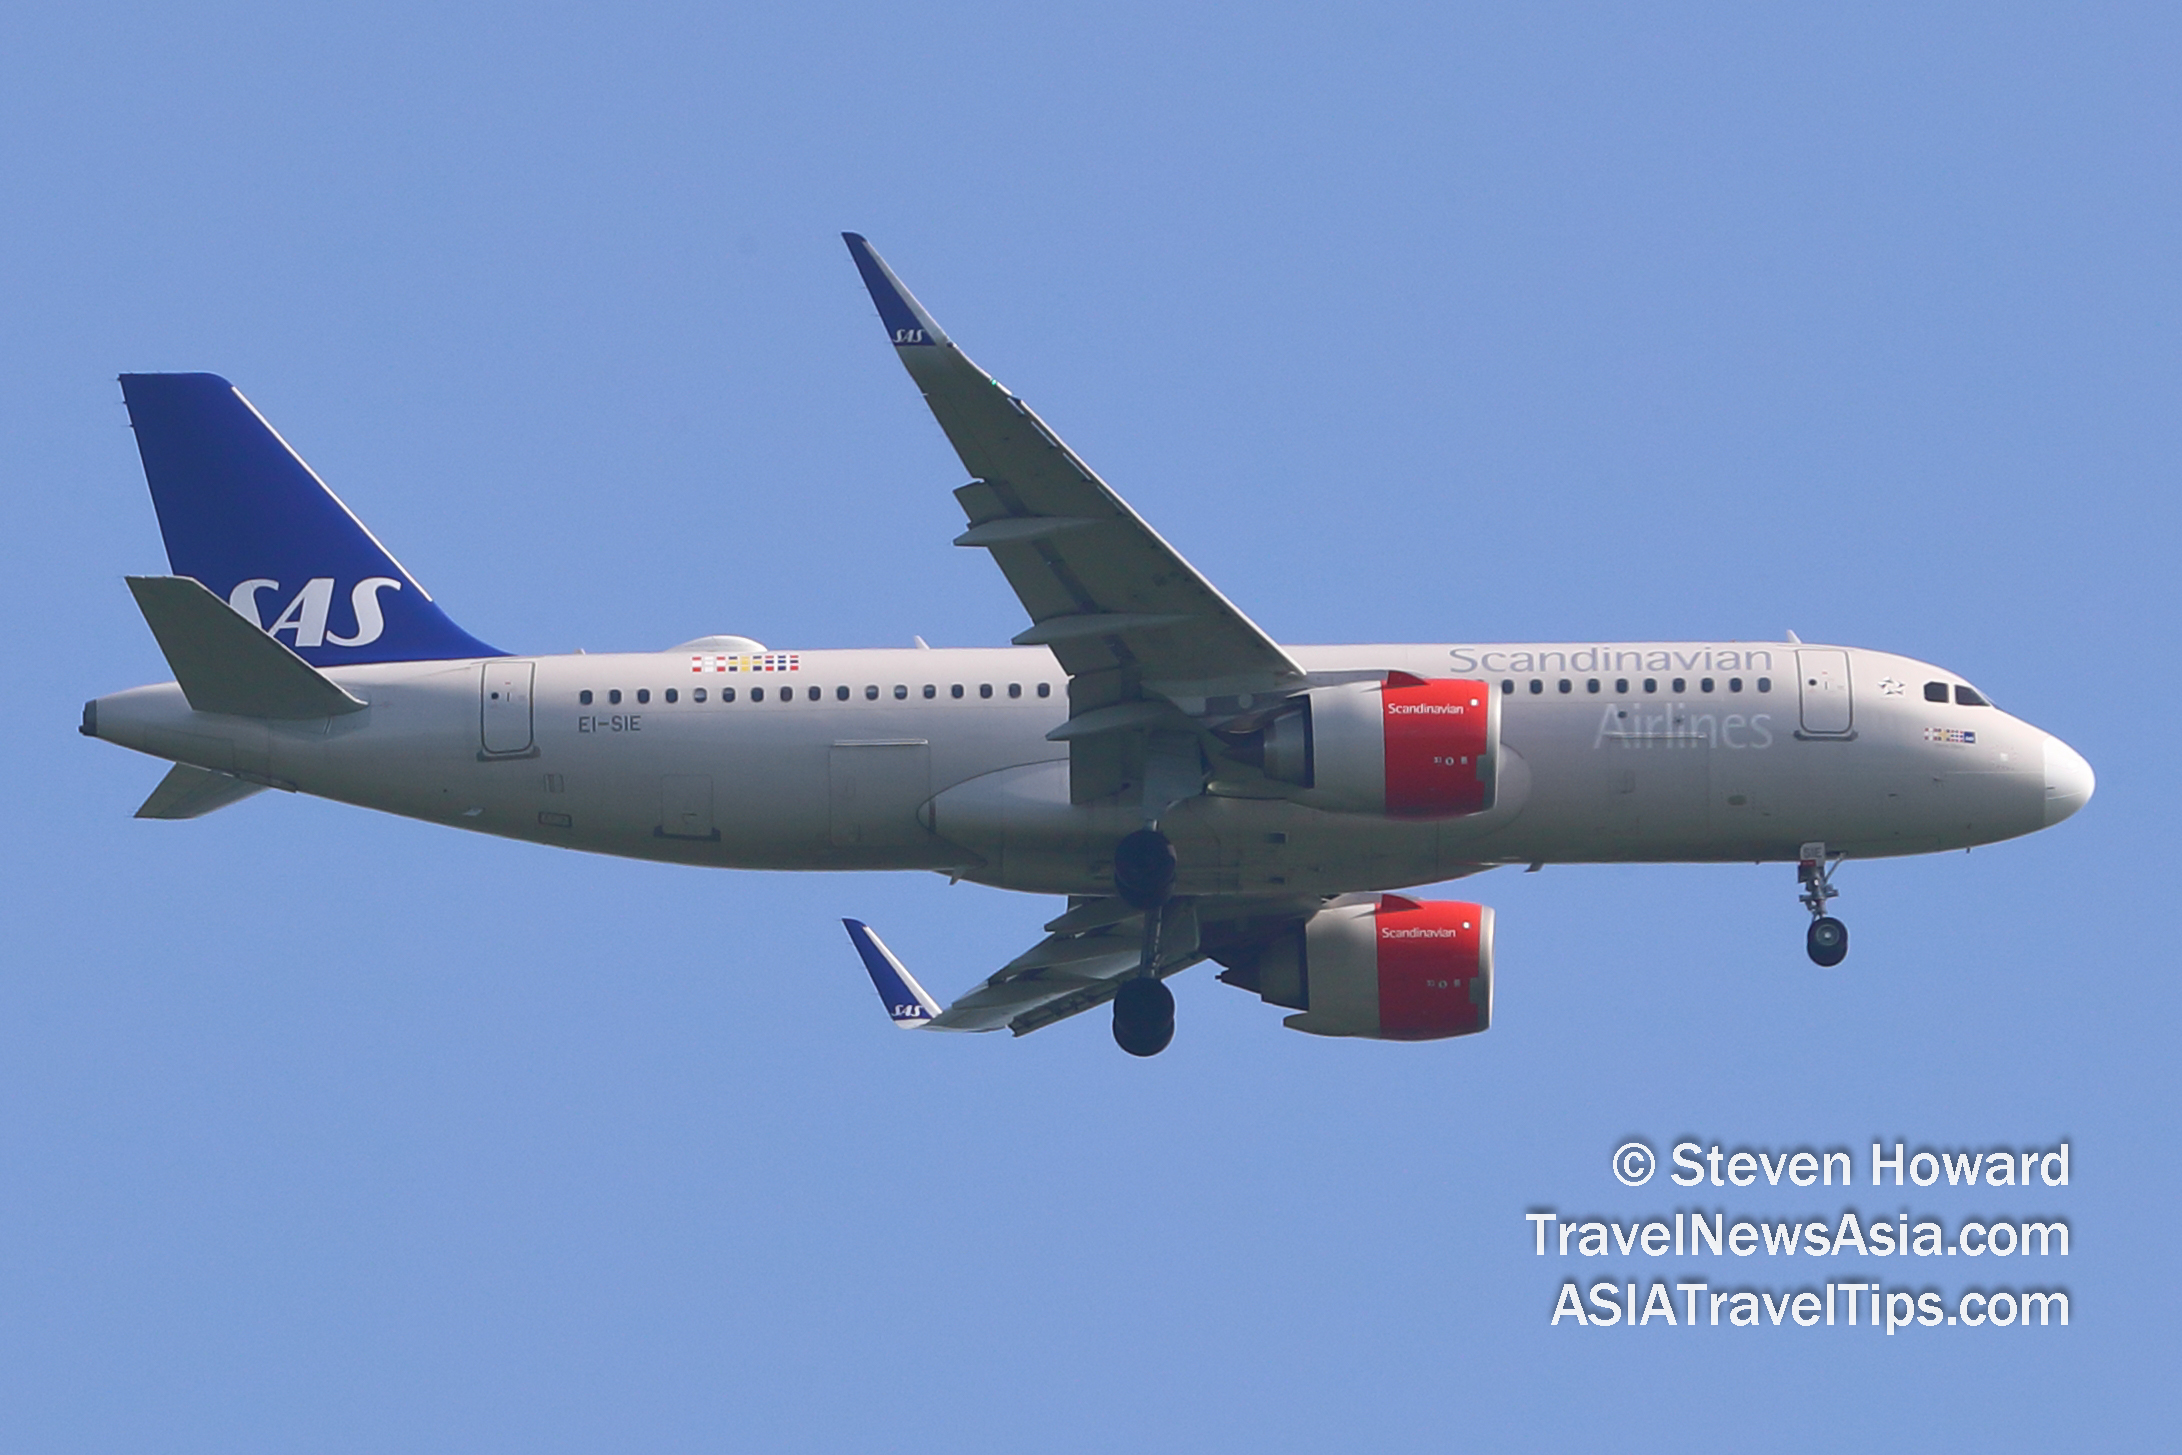 SAS Airbus A320 reg: EI-SIE. Picture by Steven Howard of TravelNewsAsia.com Click to enlarge.